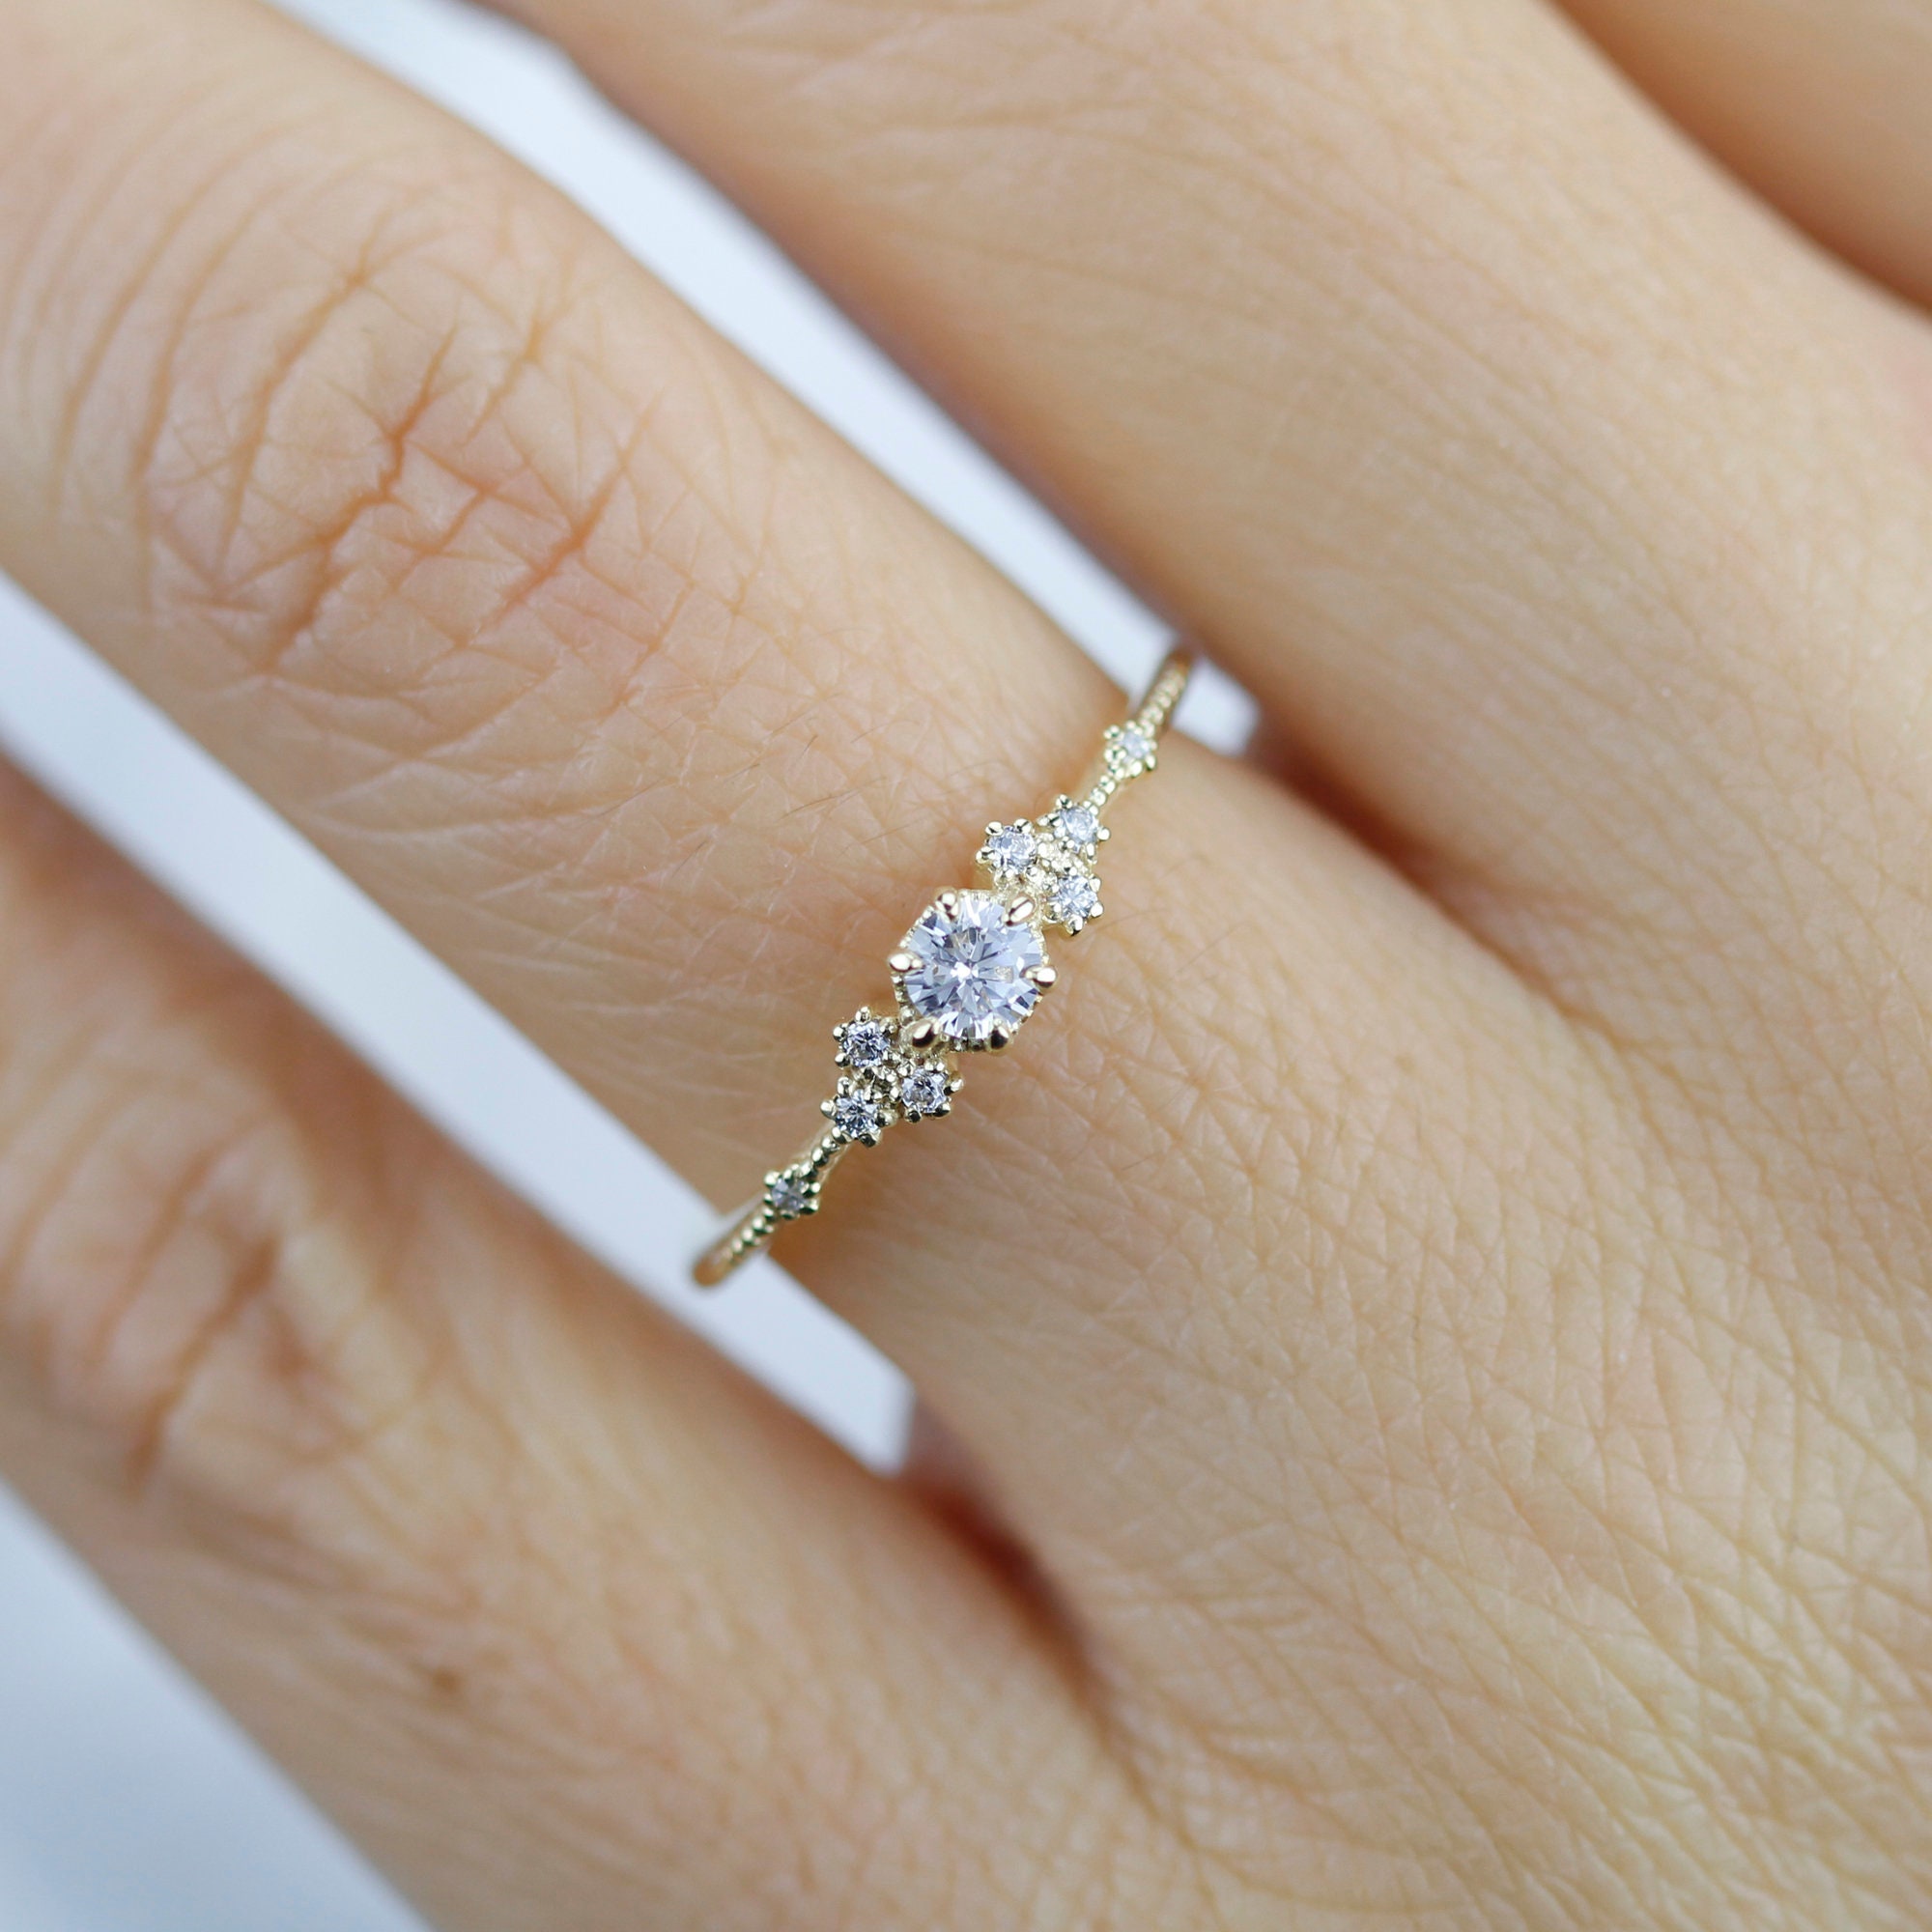 Simple Engagement Ring, White Gold Ring, Delicate Engagement Ring, Dainty  Engagement Ring, Minimalist Engagement Ring -  Canada